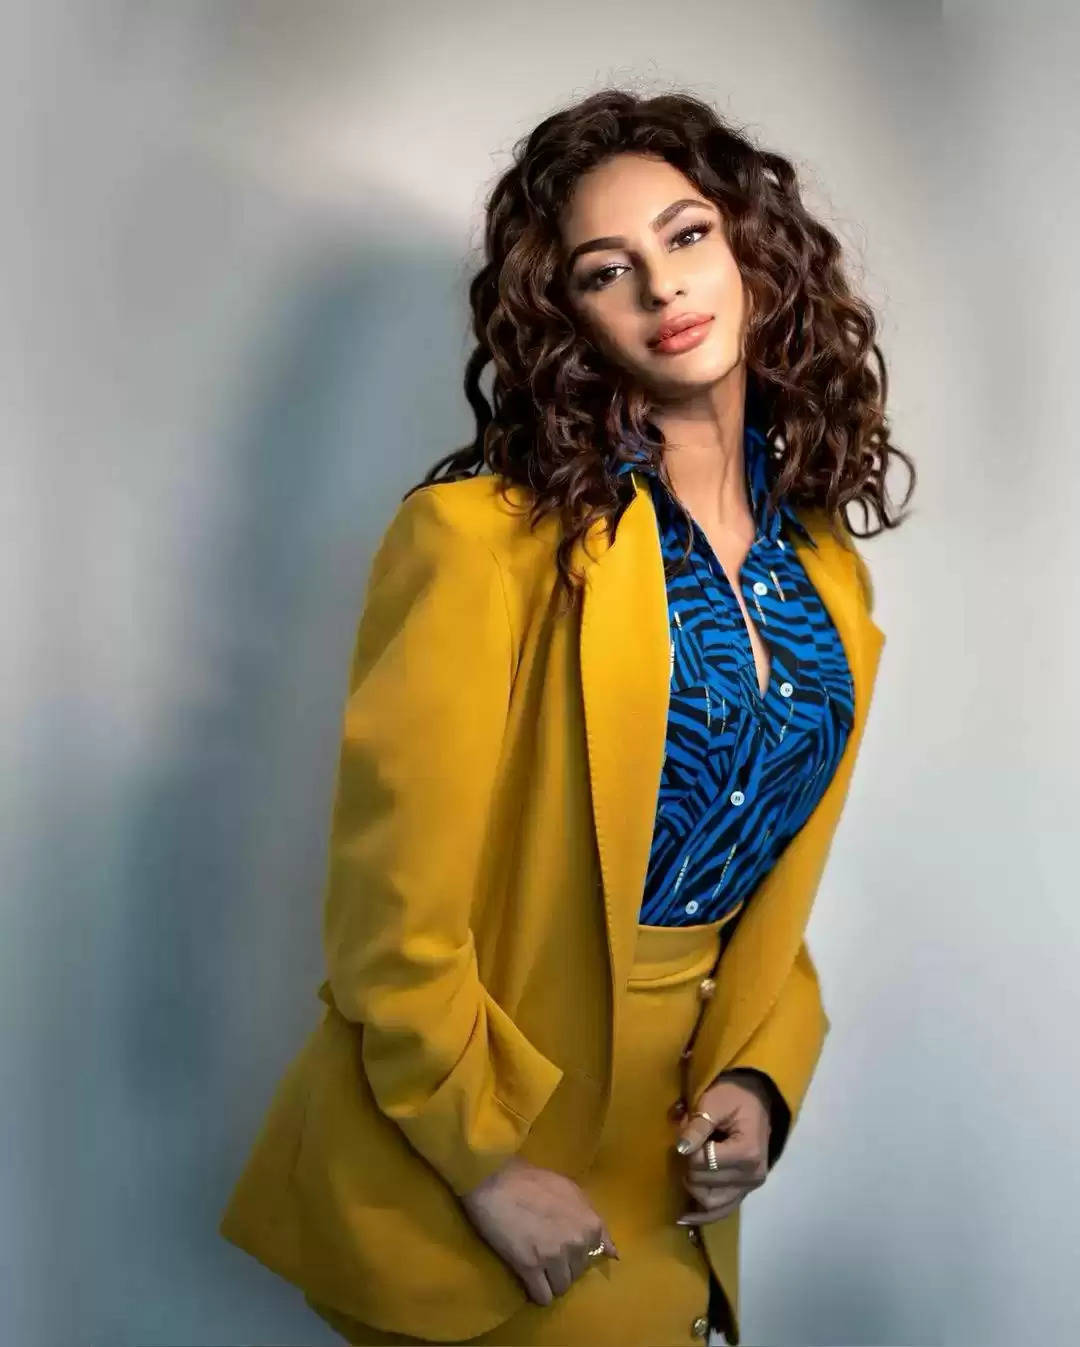 Seerat Kapoor Shines Among Critics and Audience For Her Portrayal Of Hamslekha in "Save The Tigers 2" on Disney+Hotstar